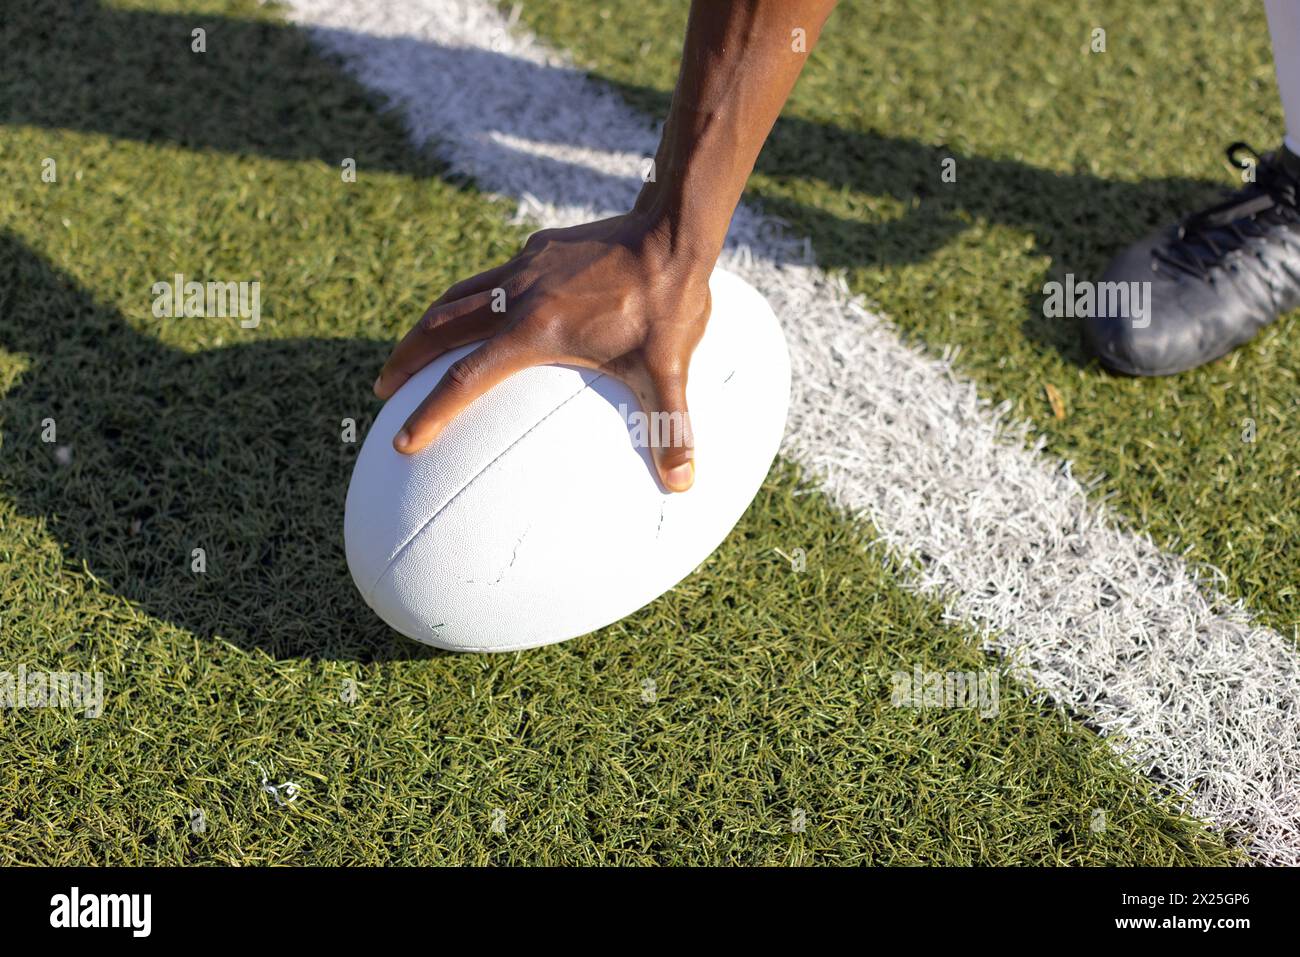 An African American young male athlete wearing cleats placing hand on rugby ball on grass field Stock Photo